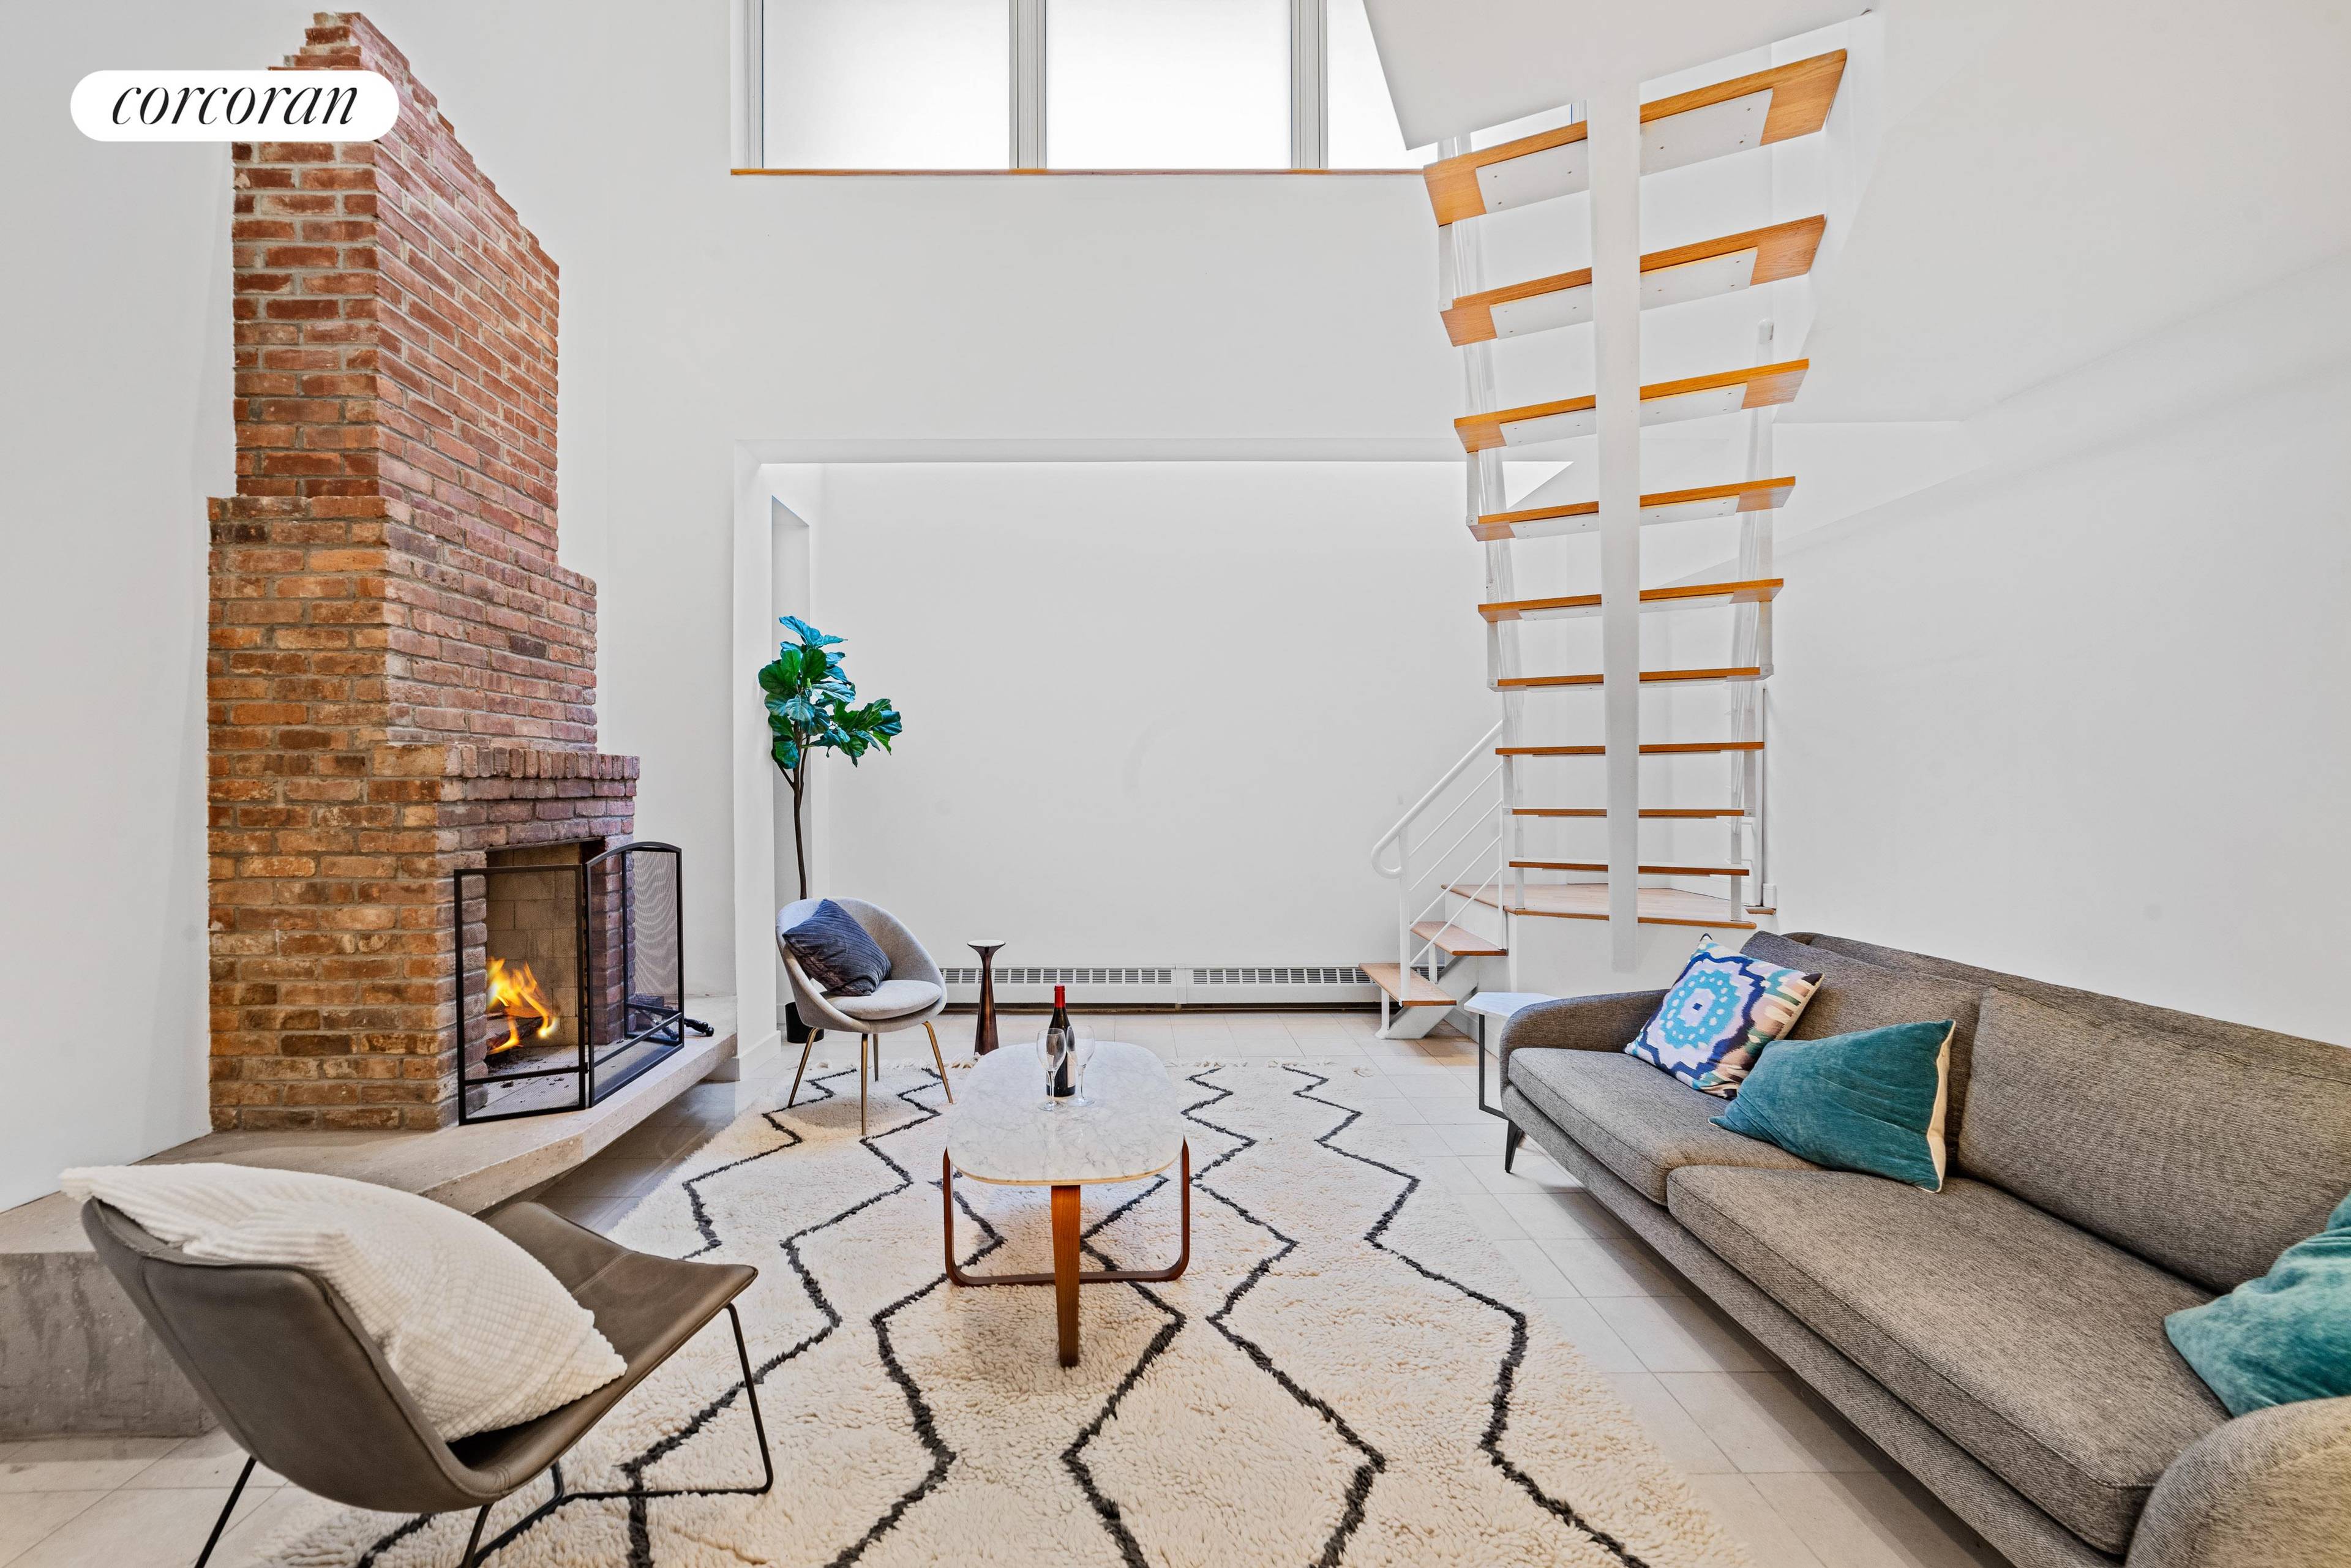 Townhouse high style living in an enormous duplex garden apartment in the heart of Boerum Hill.